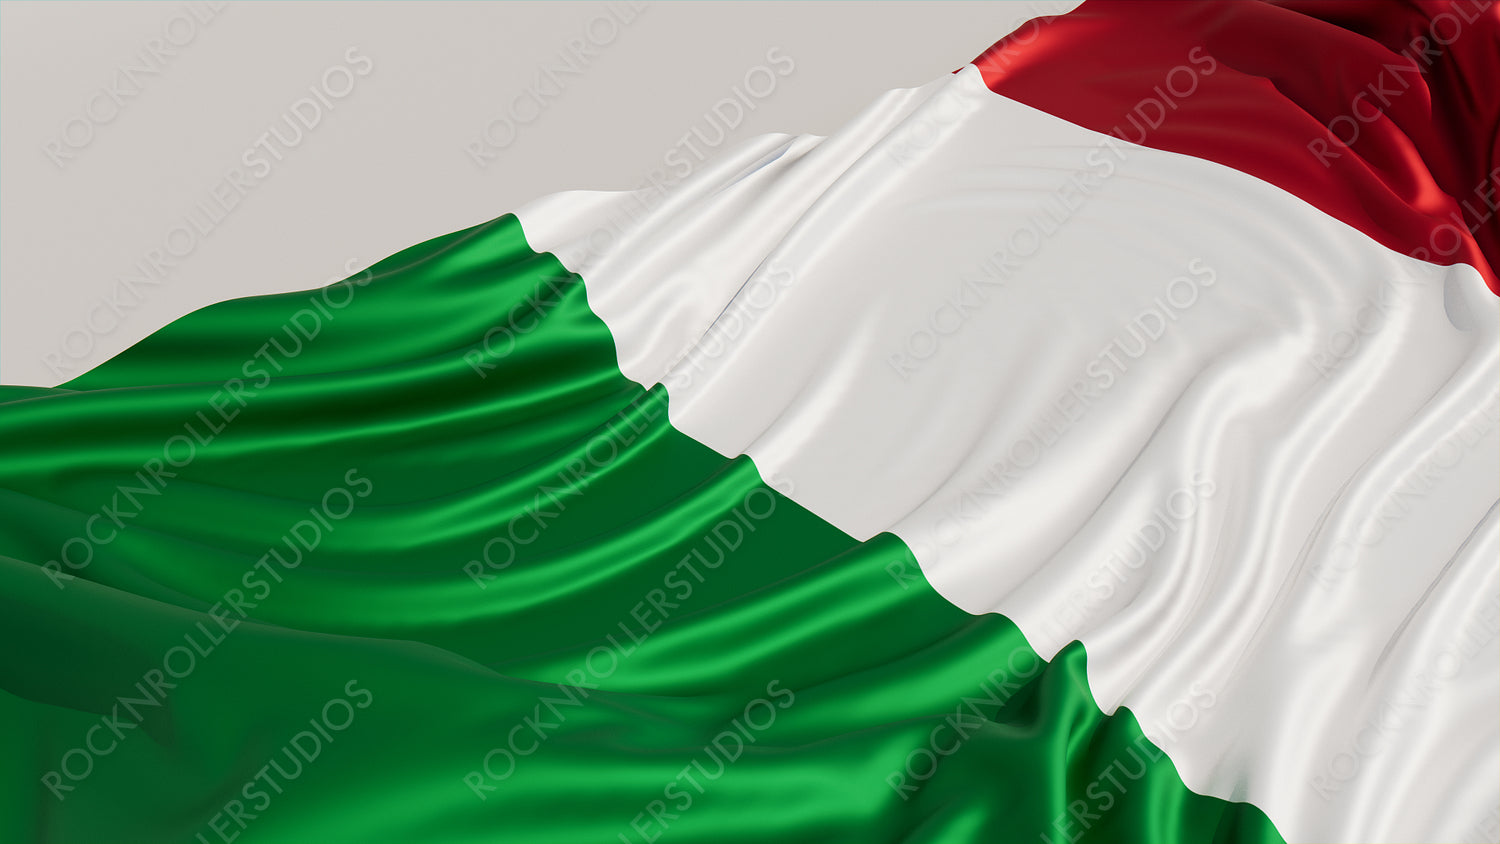 Flag of Italy on a White surface. Euro 2020 Soccer Wallpaper.